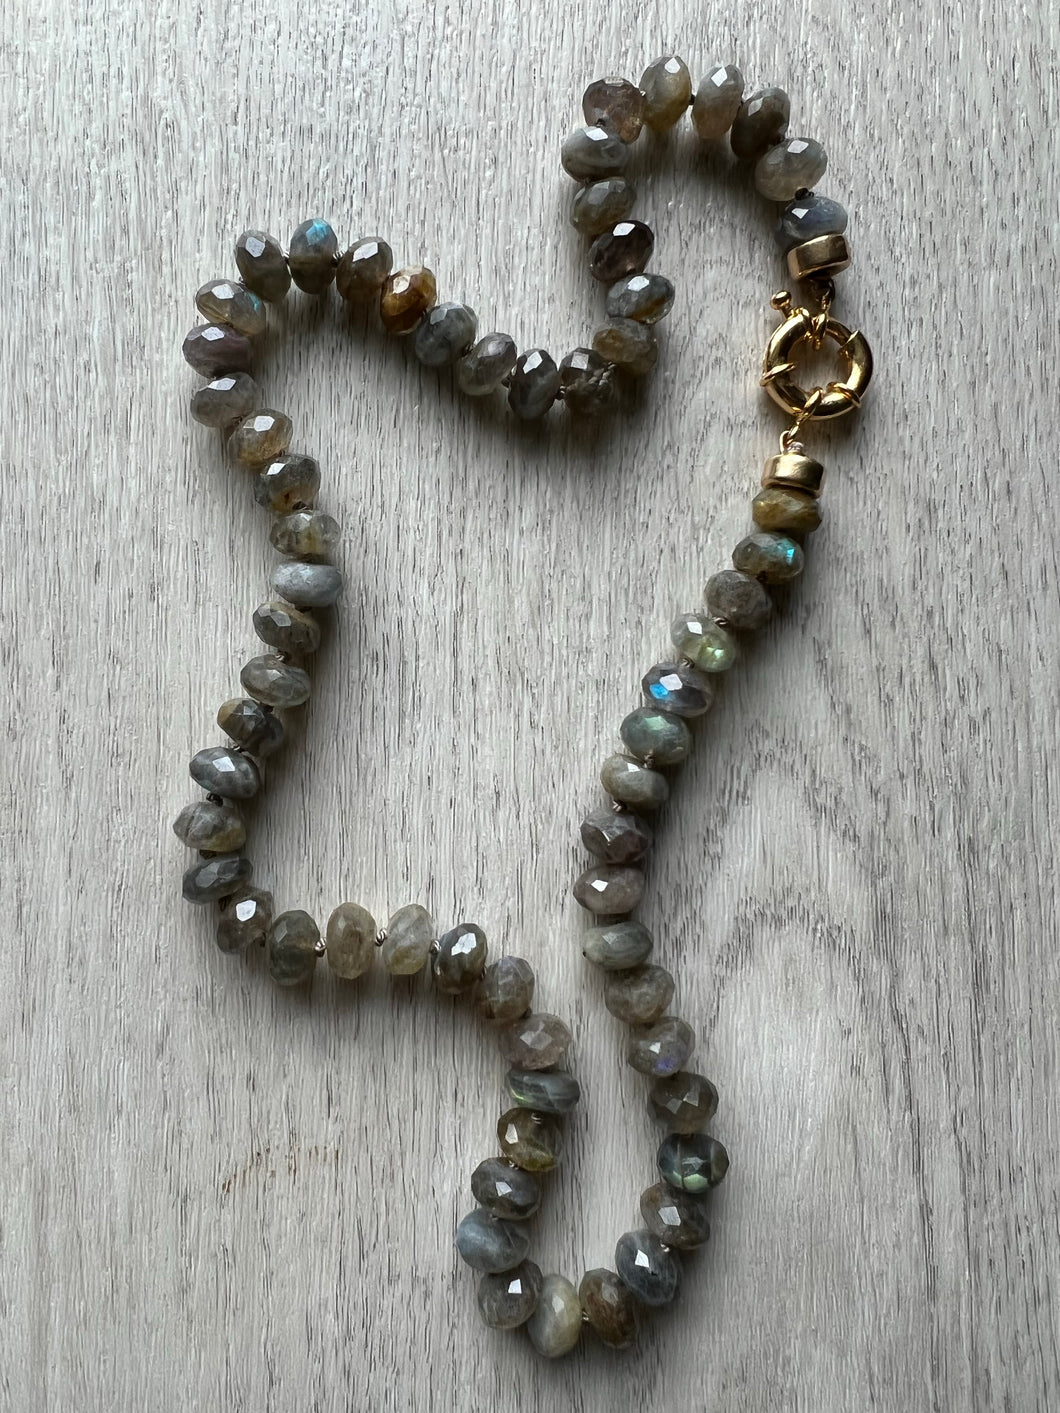 9mm faceted Labradorite gemstones hand knotted on grey silk thread.  A stone of transformation, Labradorite is a useful companion through change, imparting strength and perseverance.  This necklace with gorgeous AAA quality labradorite is finished off with a gold filled clasp and measures 18 inches